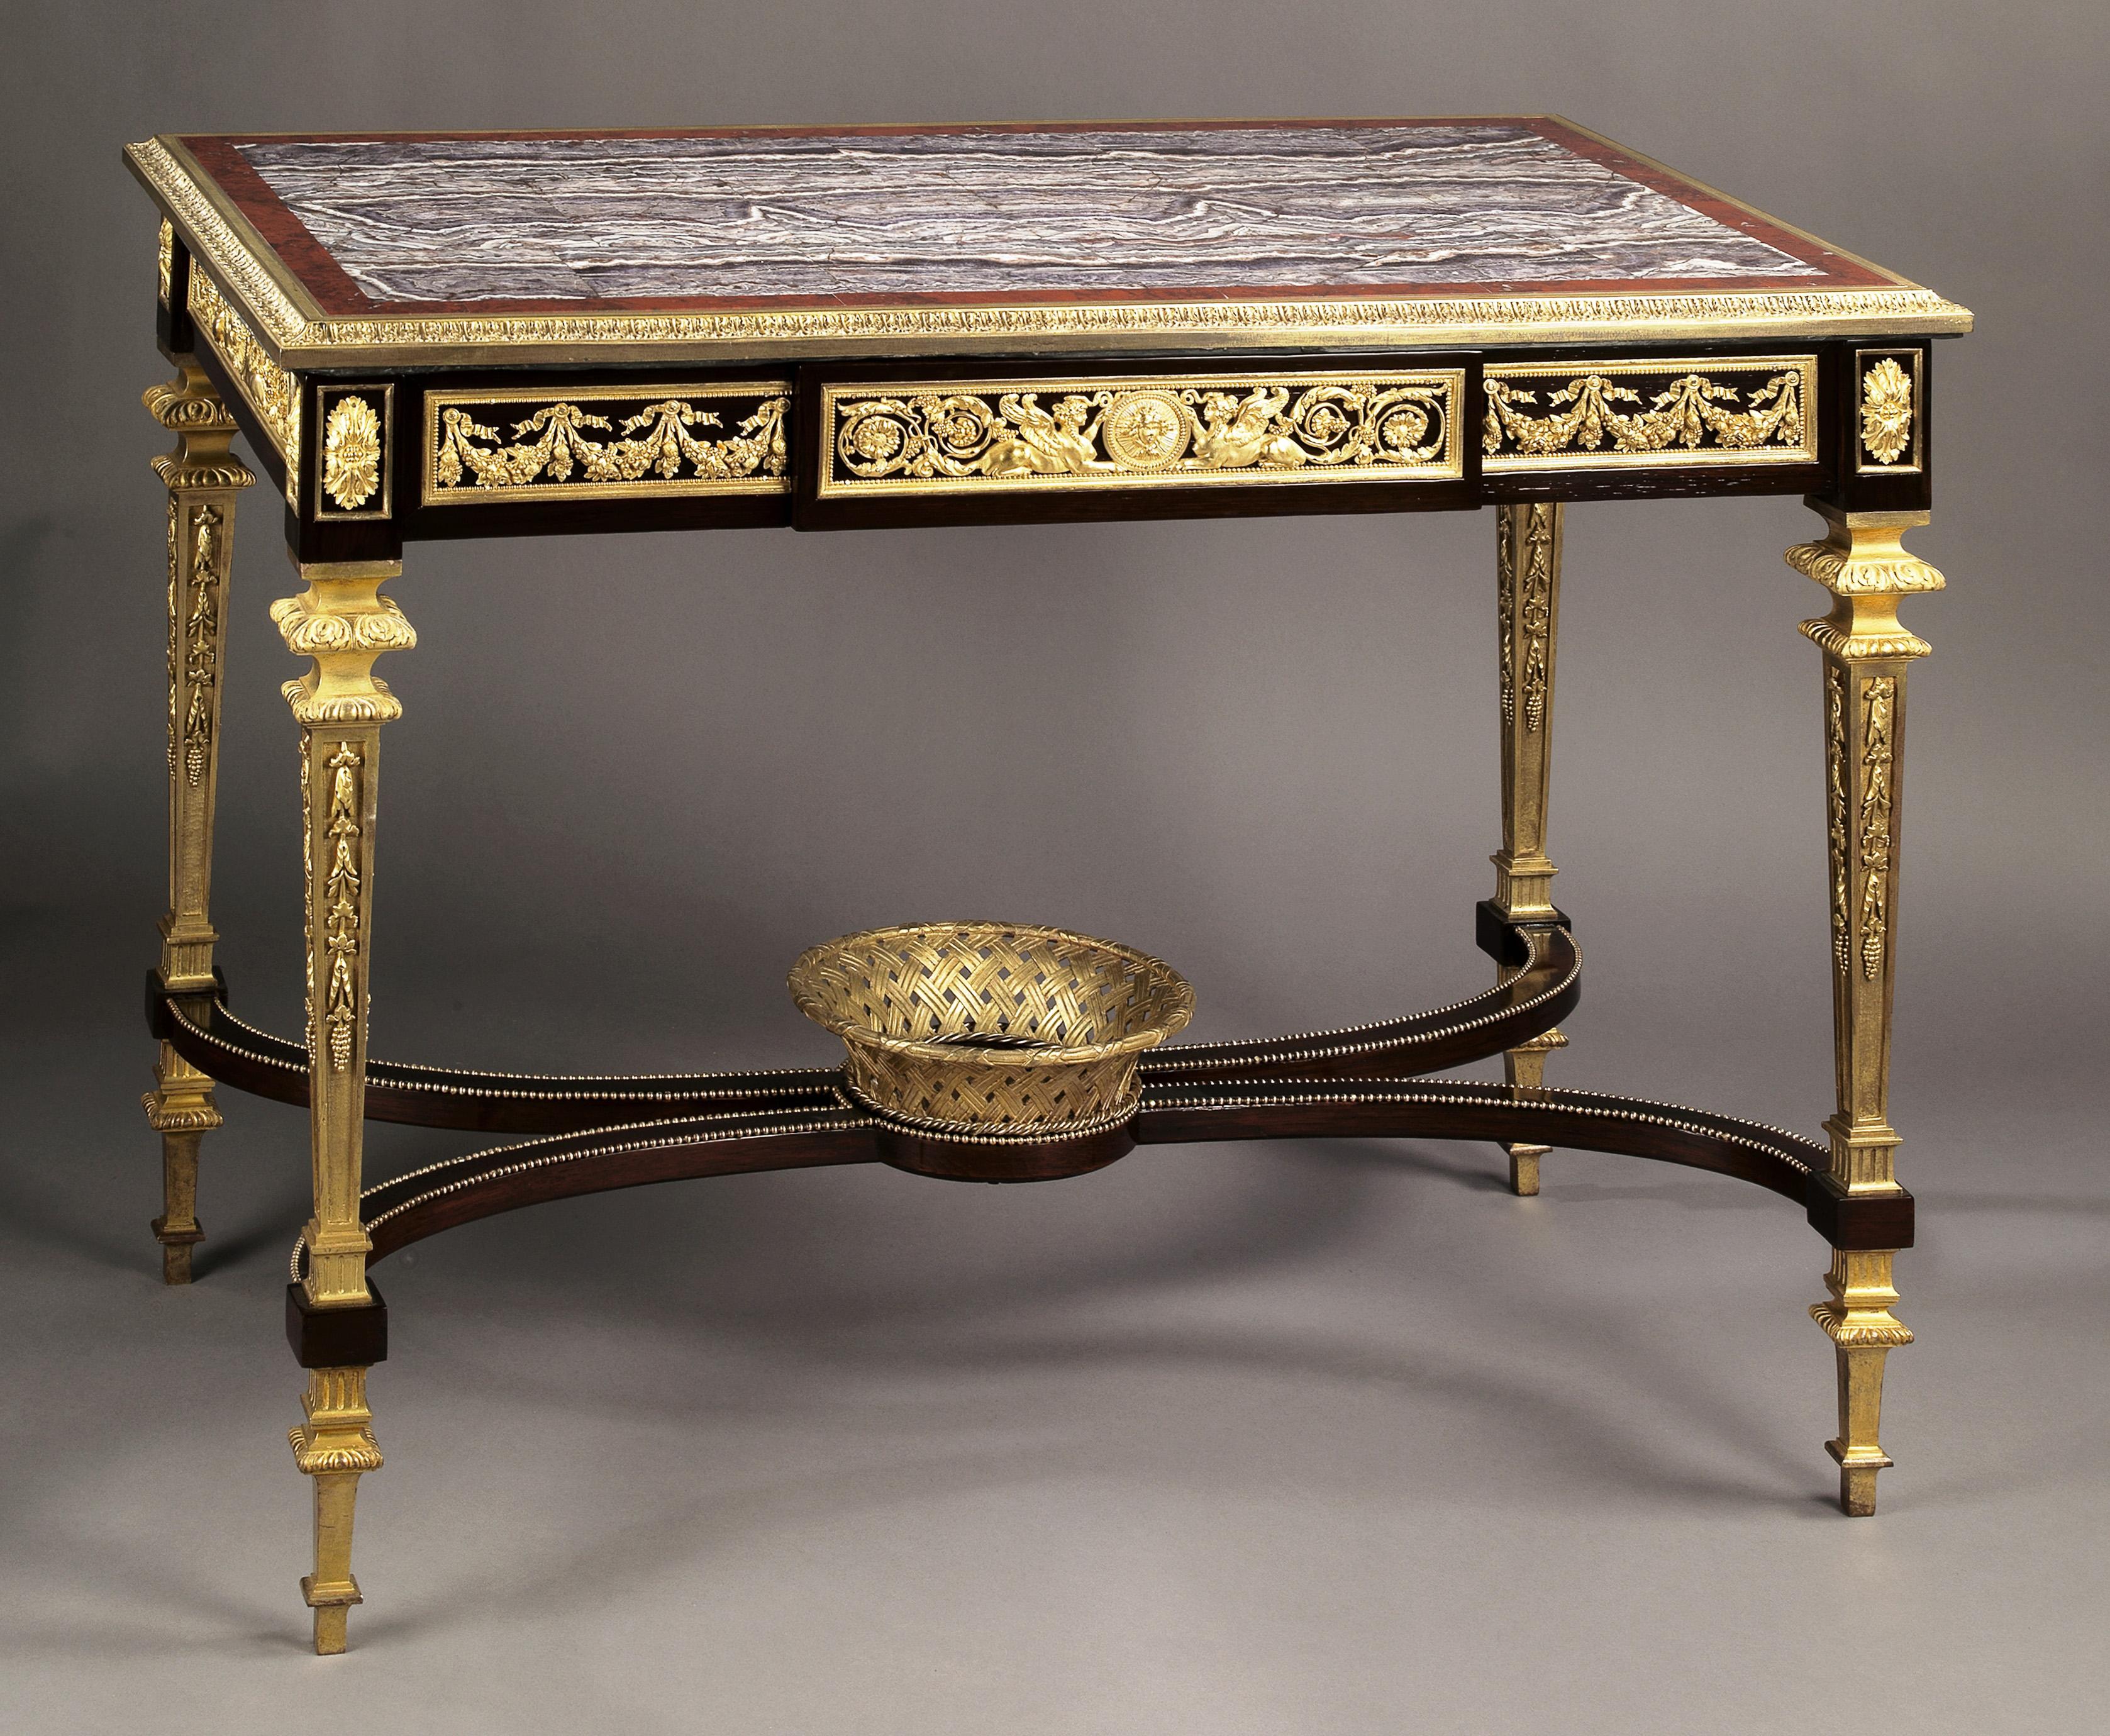 An exceptional Louis XVI style gilt-bronze mounted centre table in the manner of Adam Weisweiler, with a rare amethyst quartz marble top.

French, circa 1890.

This refined Louis XVI design is based on the famous dressing table by the